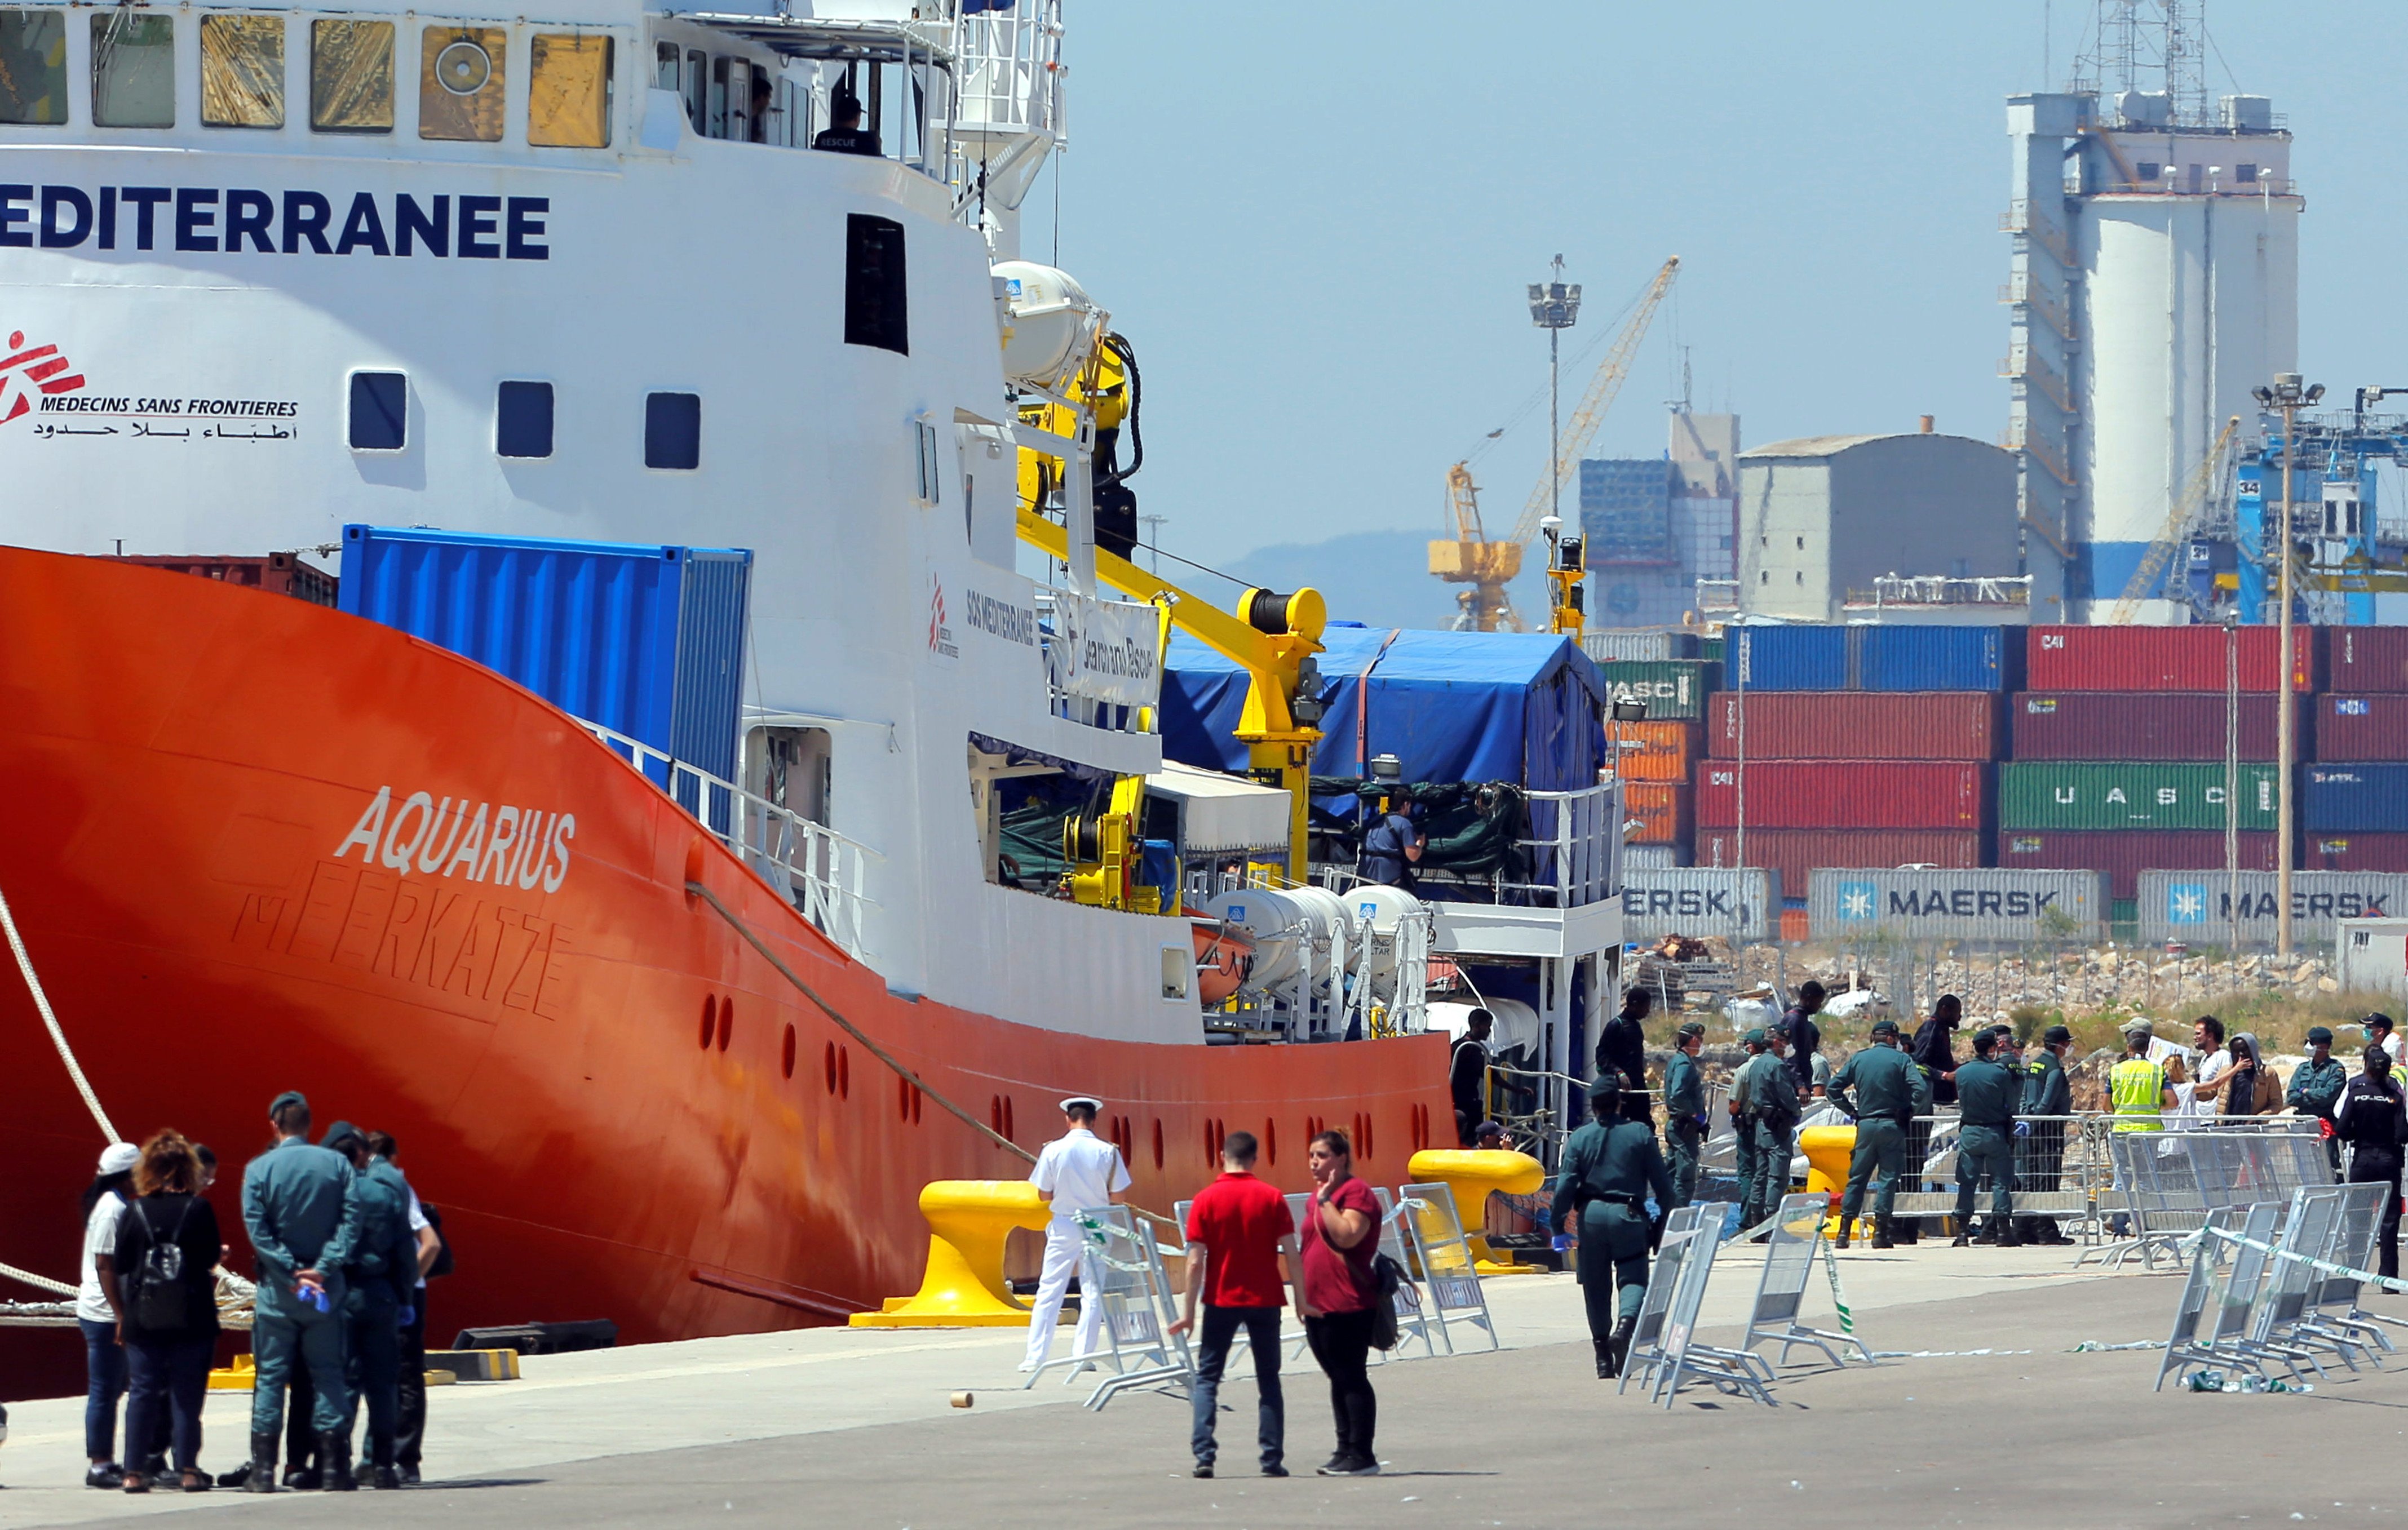 Spain to accept 60 migrants from the Aquarius after agreement with other European countries